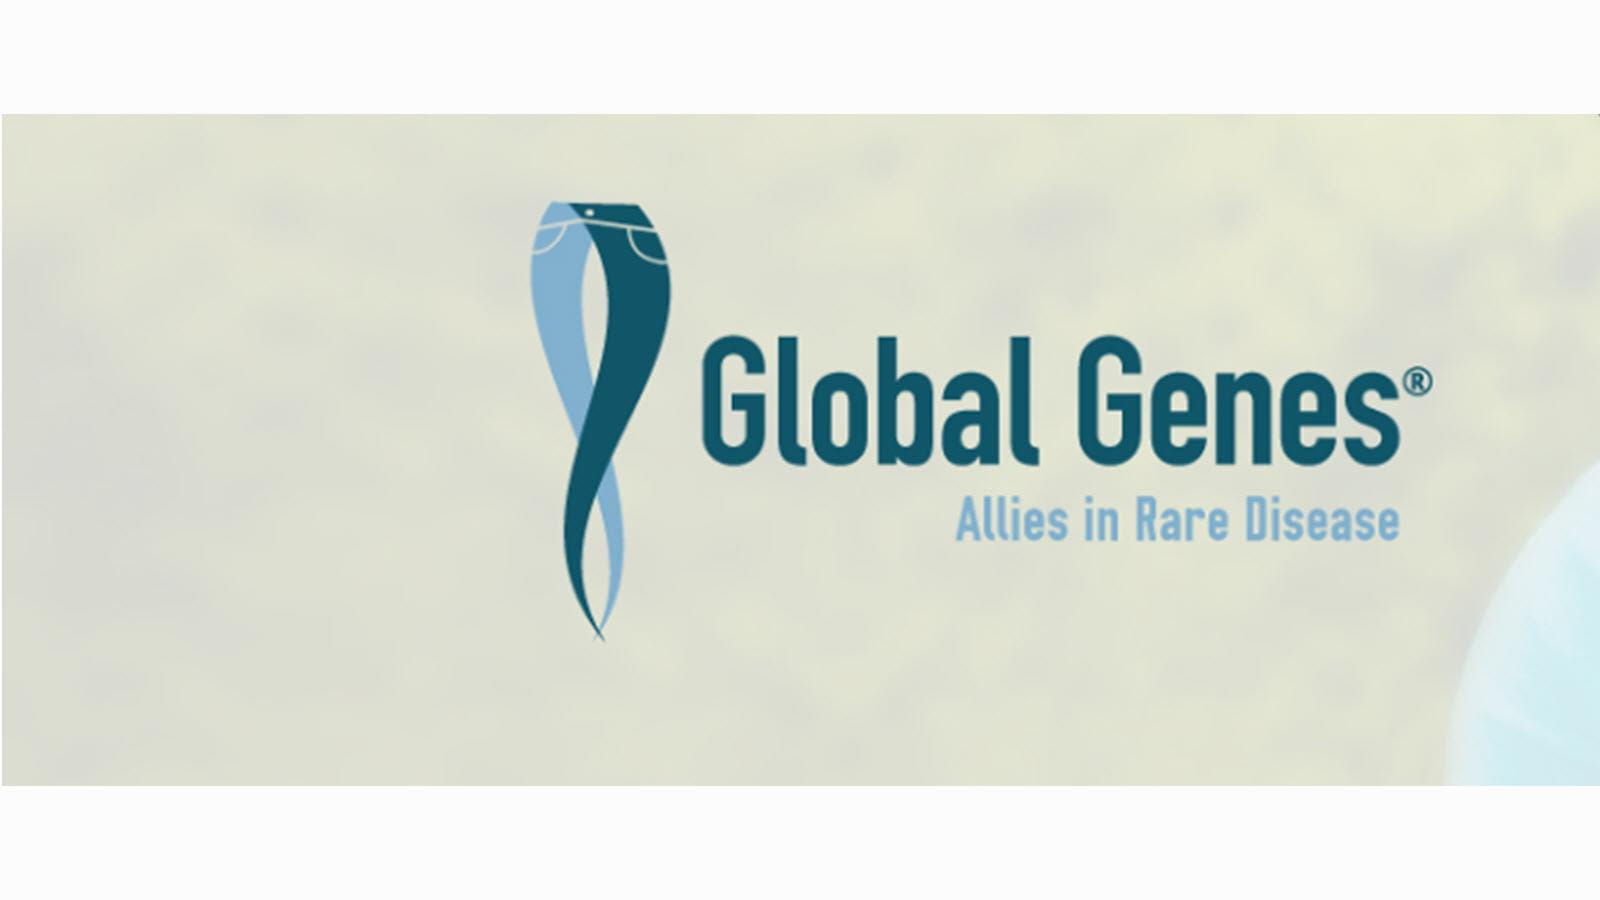 Global Genes Allies in Rare Disease with blue jean illustration